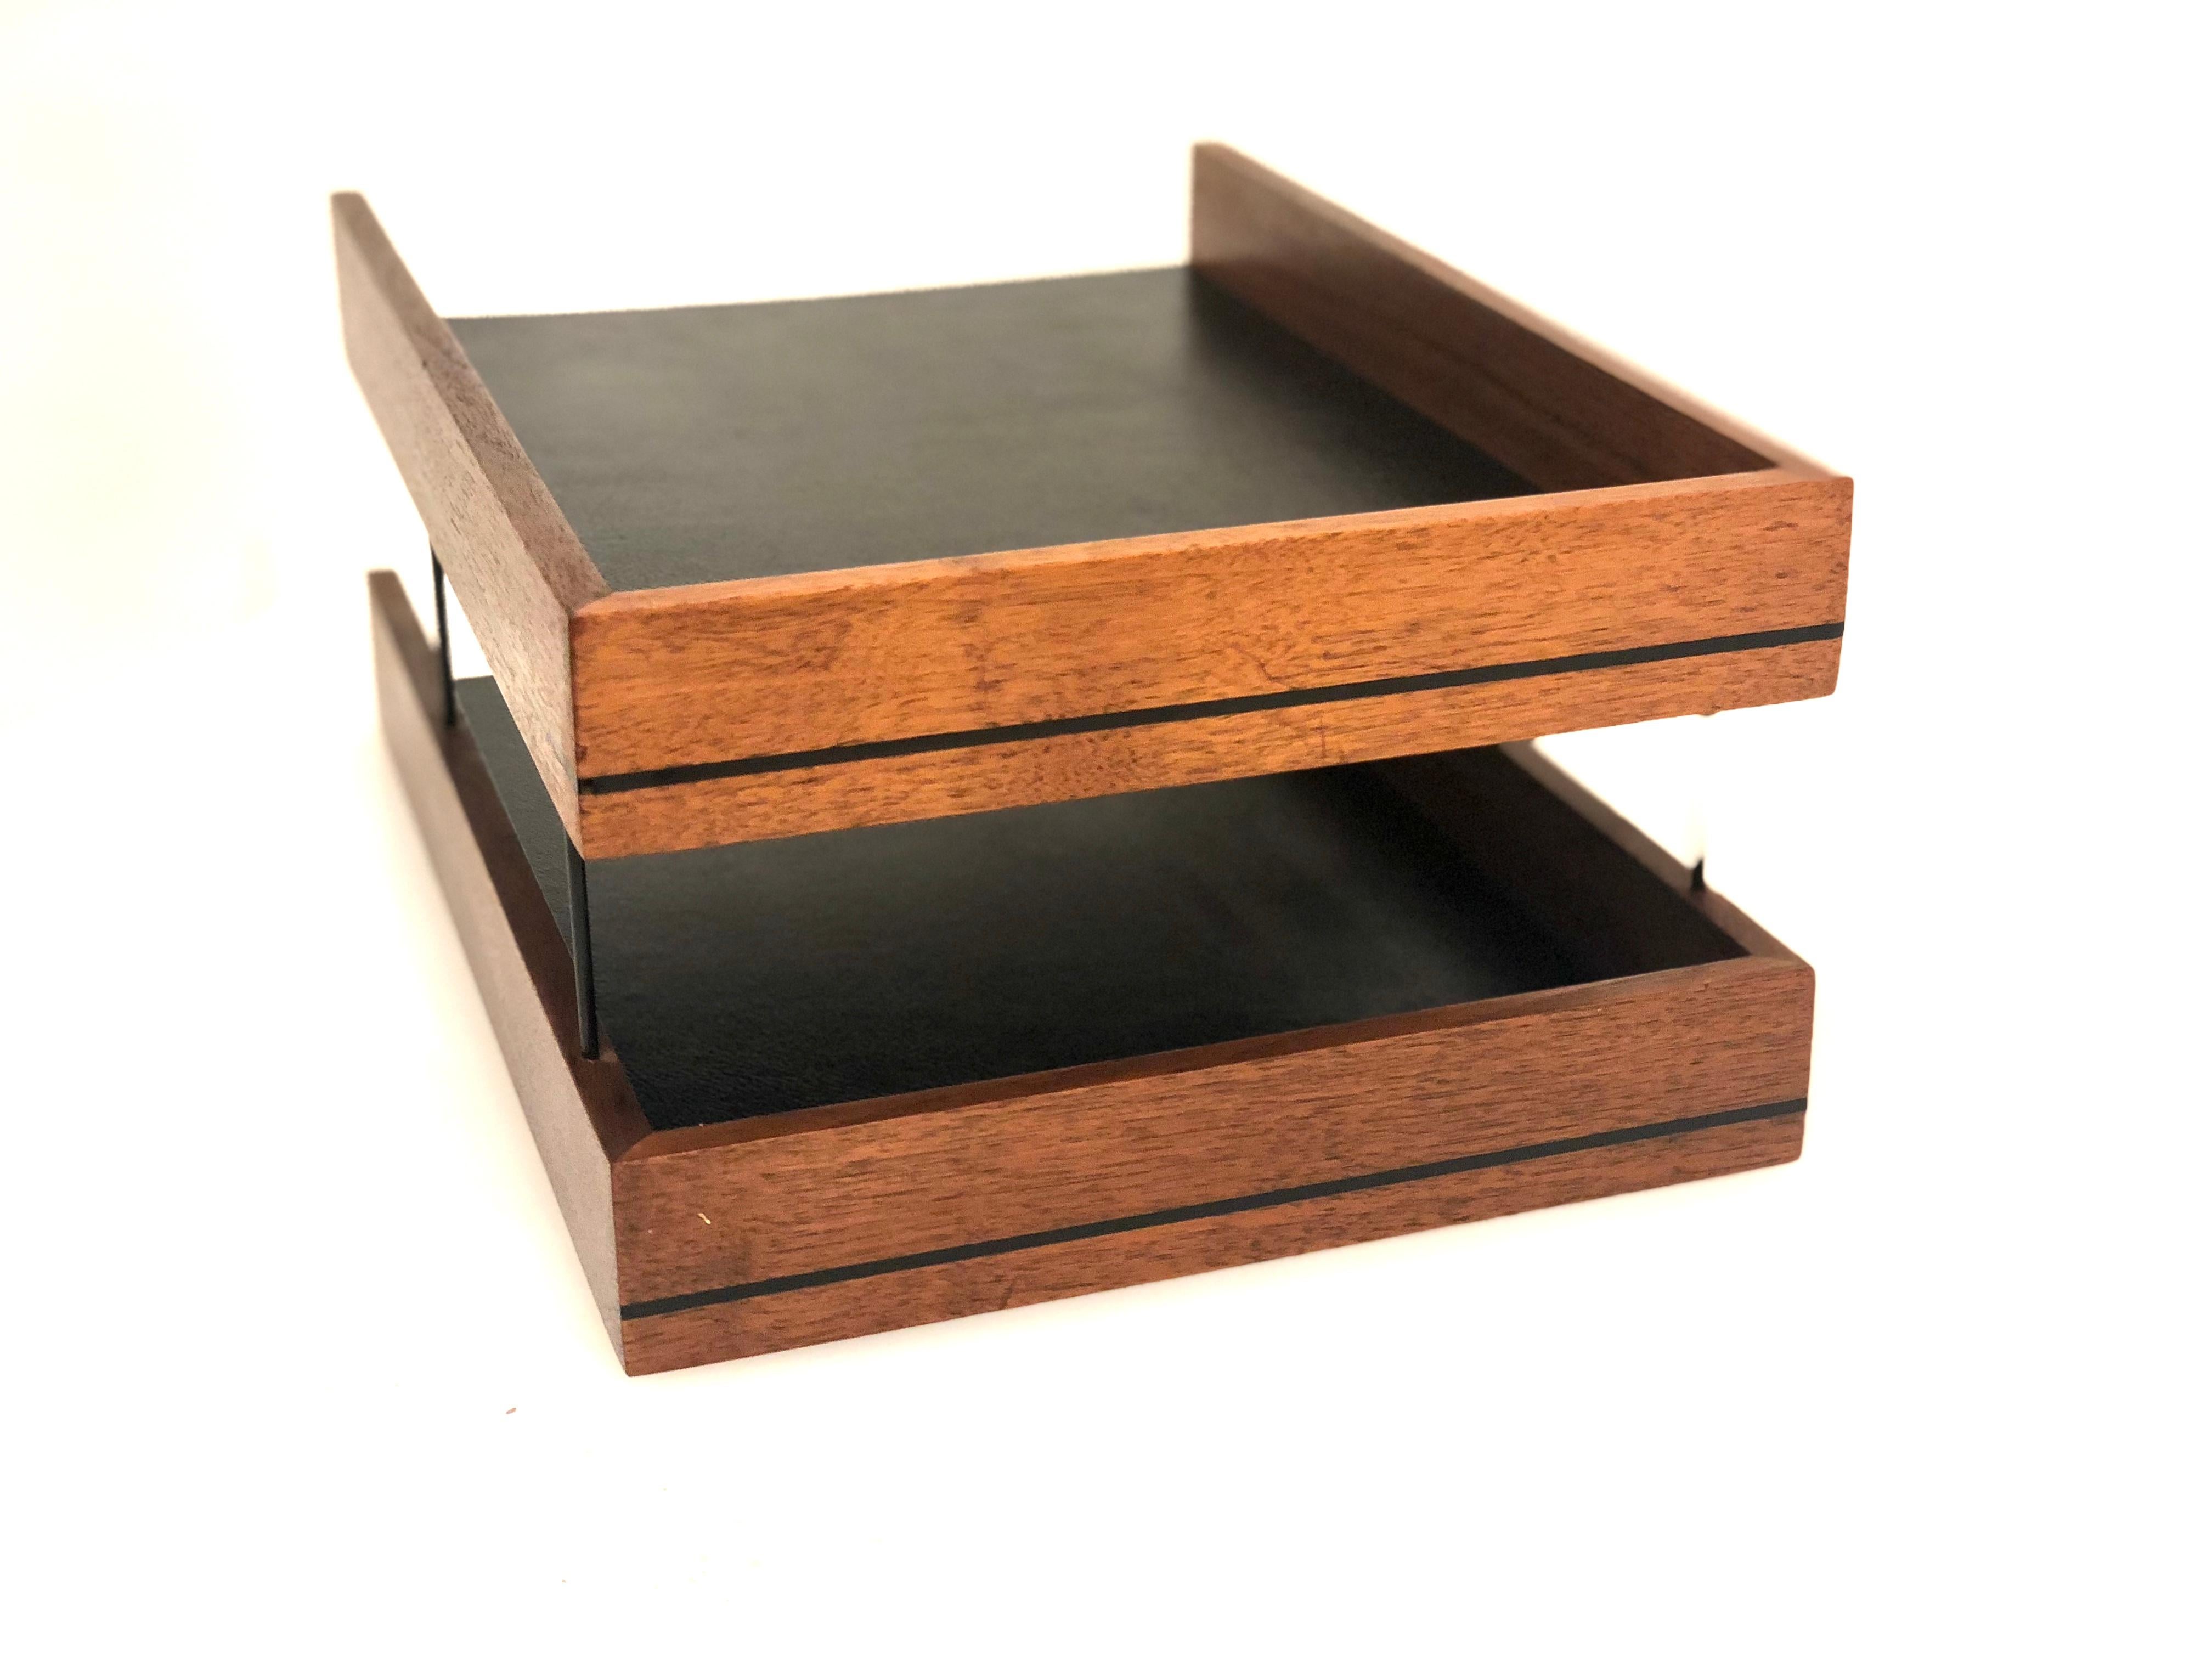 Double letter tray with black lining and solid walnut walls with black inlay detail, circa 1950s freshly refinished, Very nice accent to any executives desk! California design.